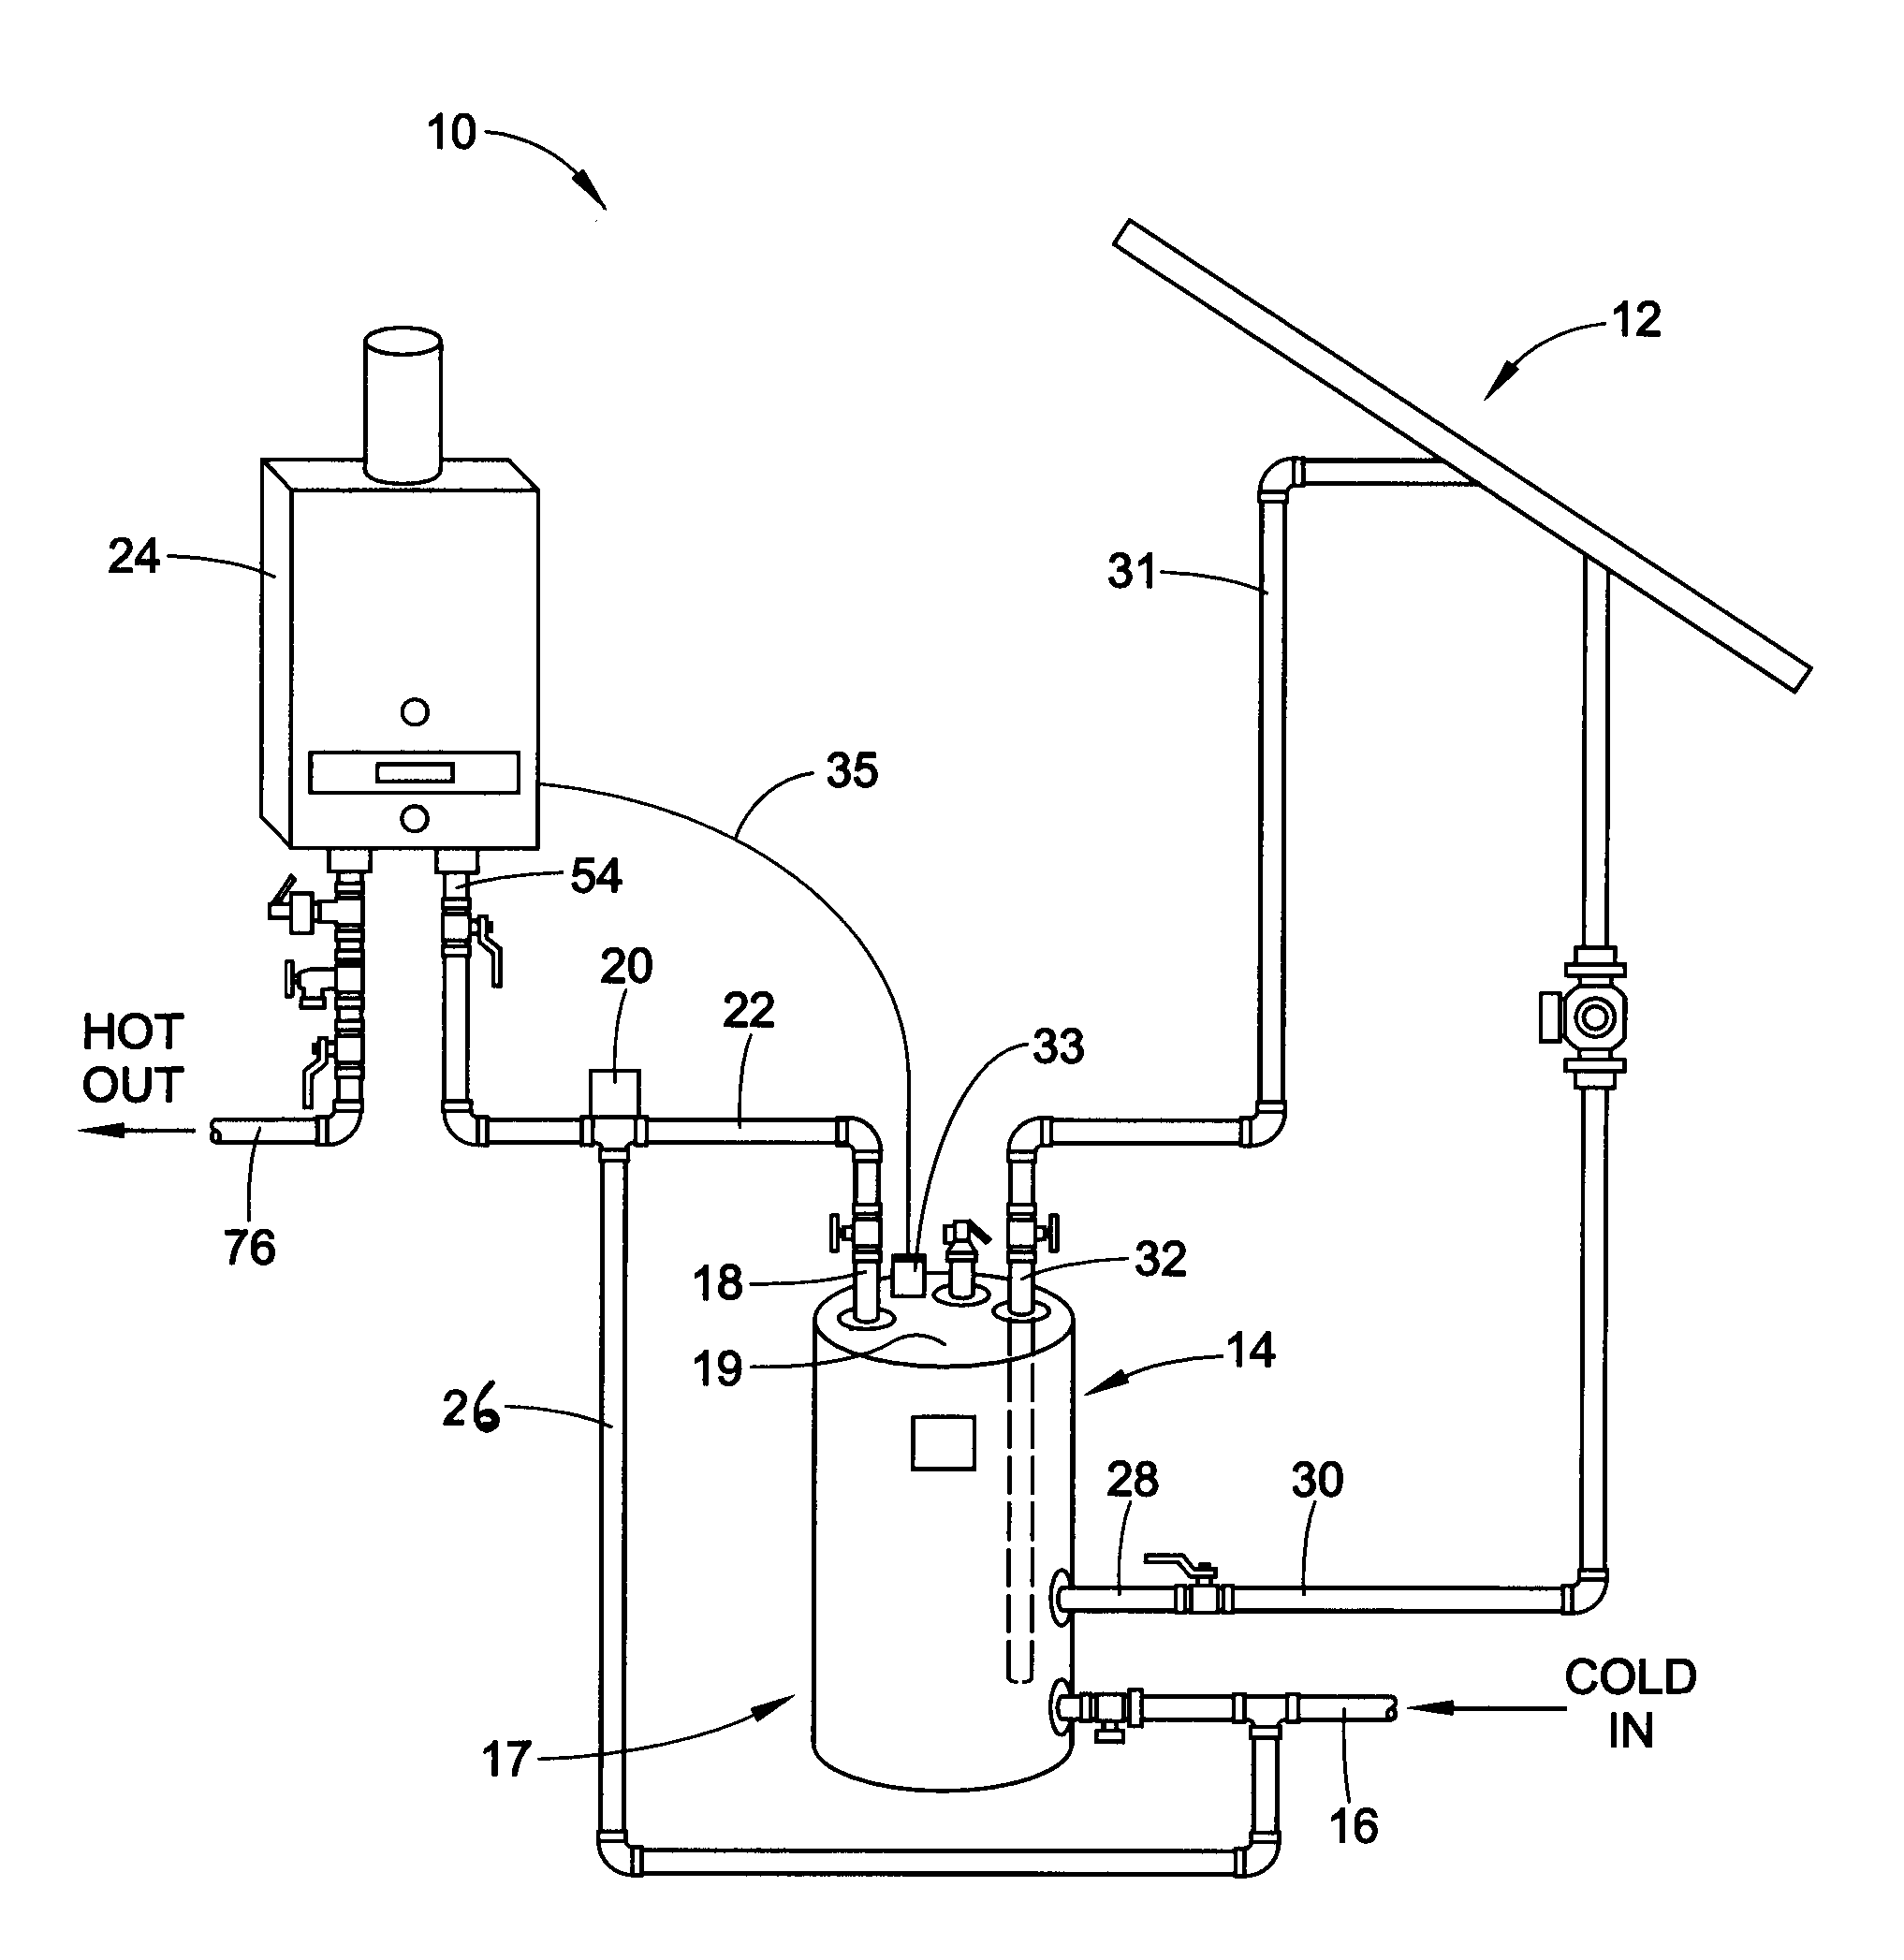 Control for a tankless water heater used with a solar water heating system